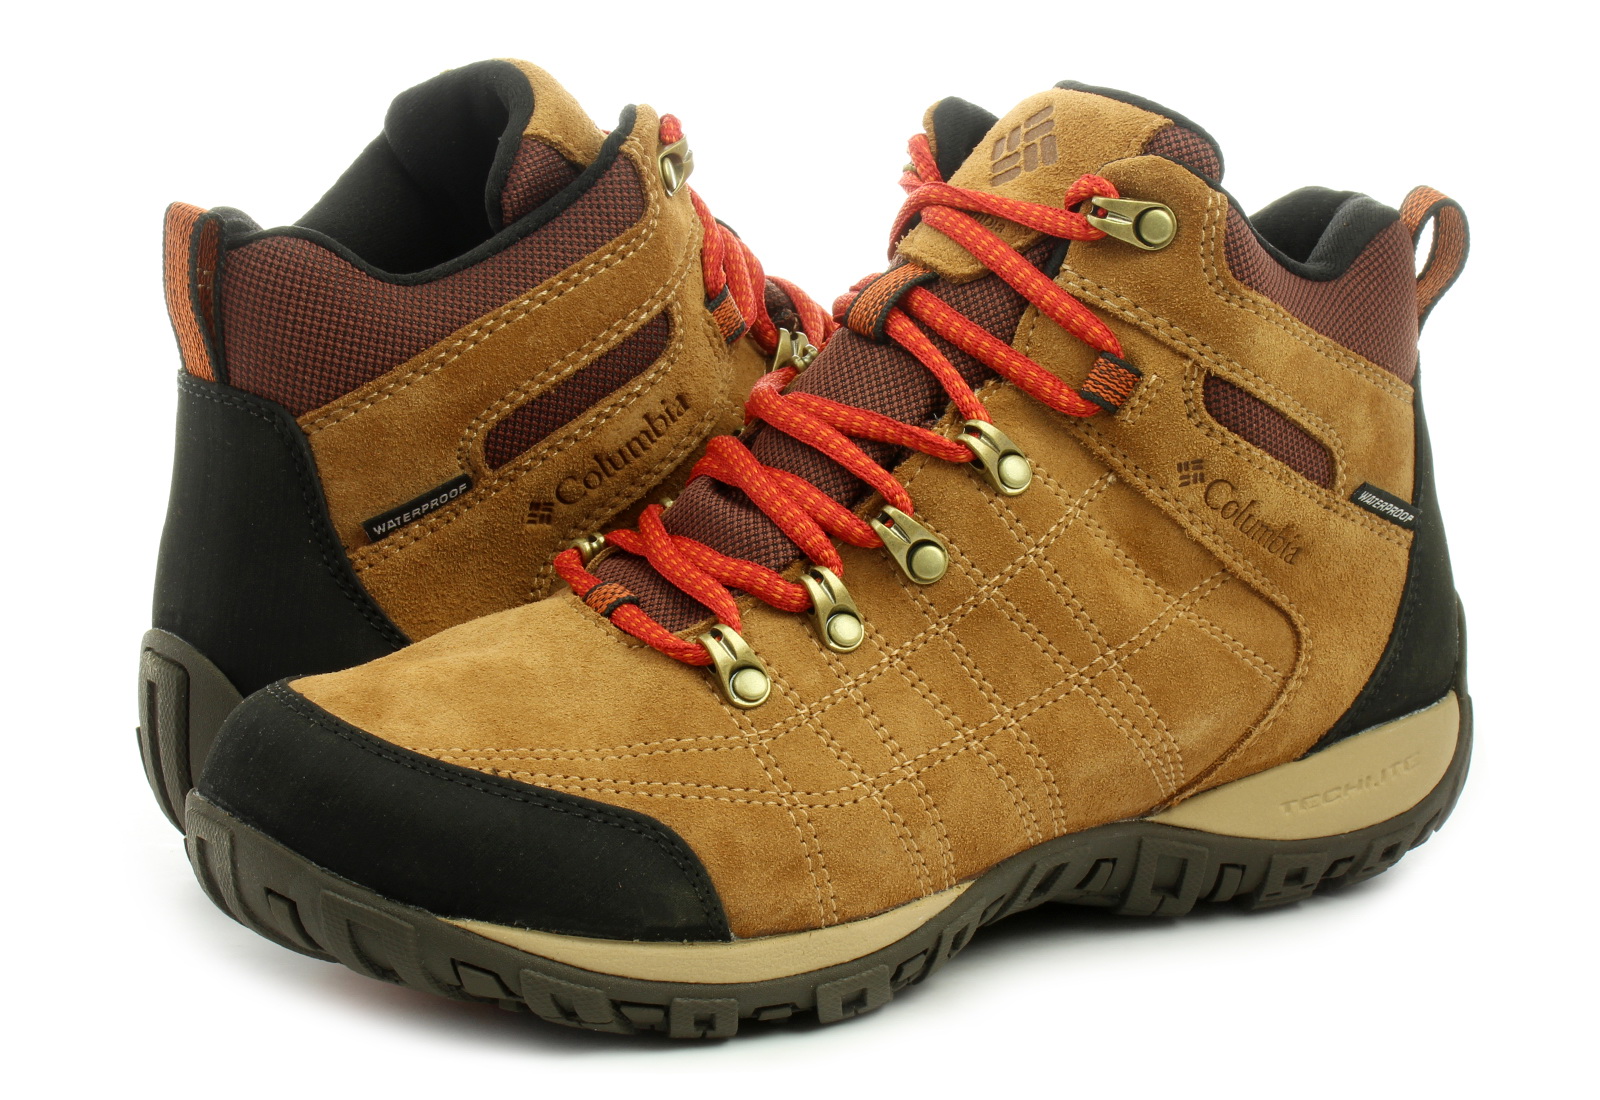 Classroom World Record Guinness Book Weakness Columbia Bocanci hikers - Peakfreak™ Venture S II Mid Wp - 1865031-286 -  Office Shoes Romania